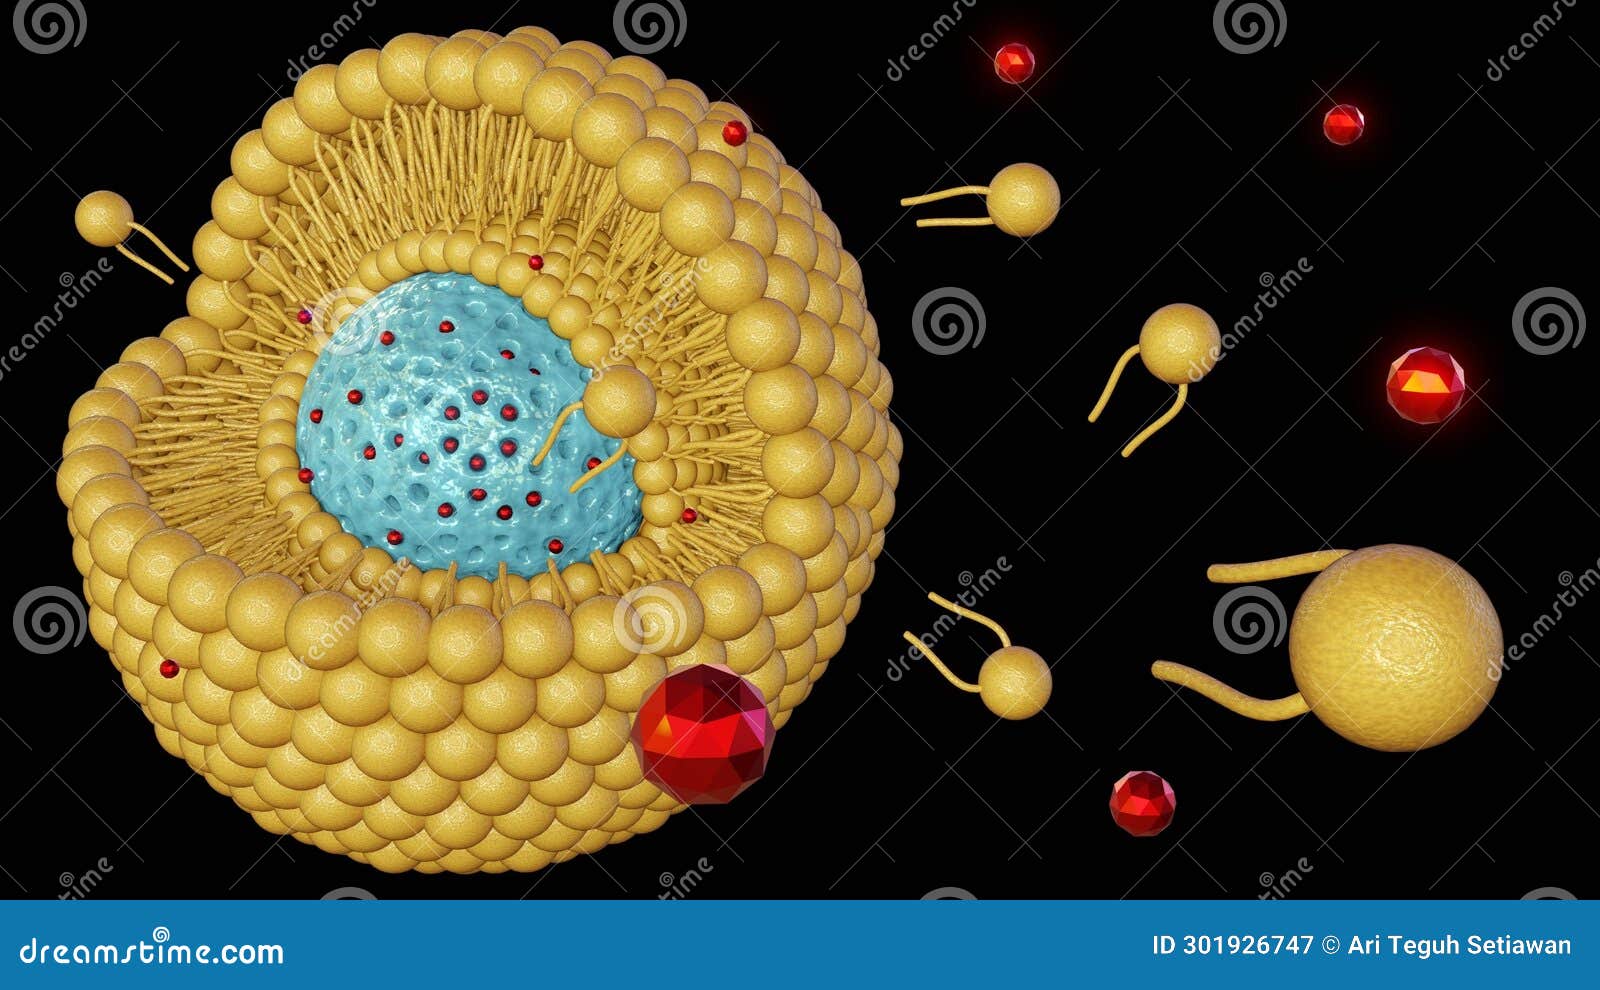 Mesoporous Silica Nanoparticle With DNA Helix Royalty-Free Stock Photo ...